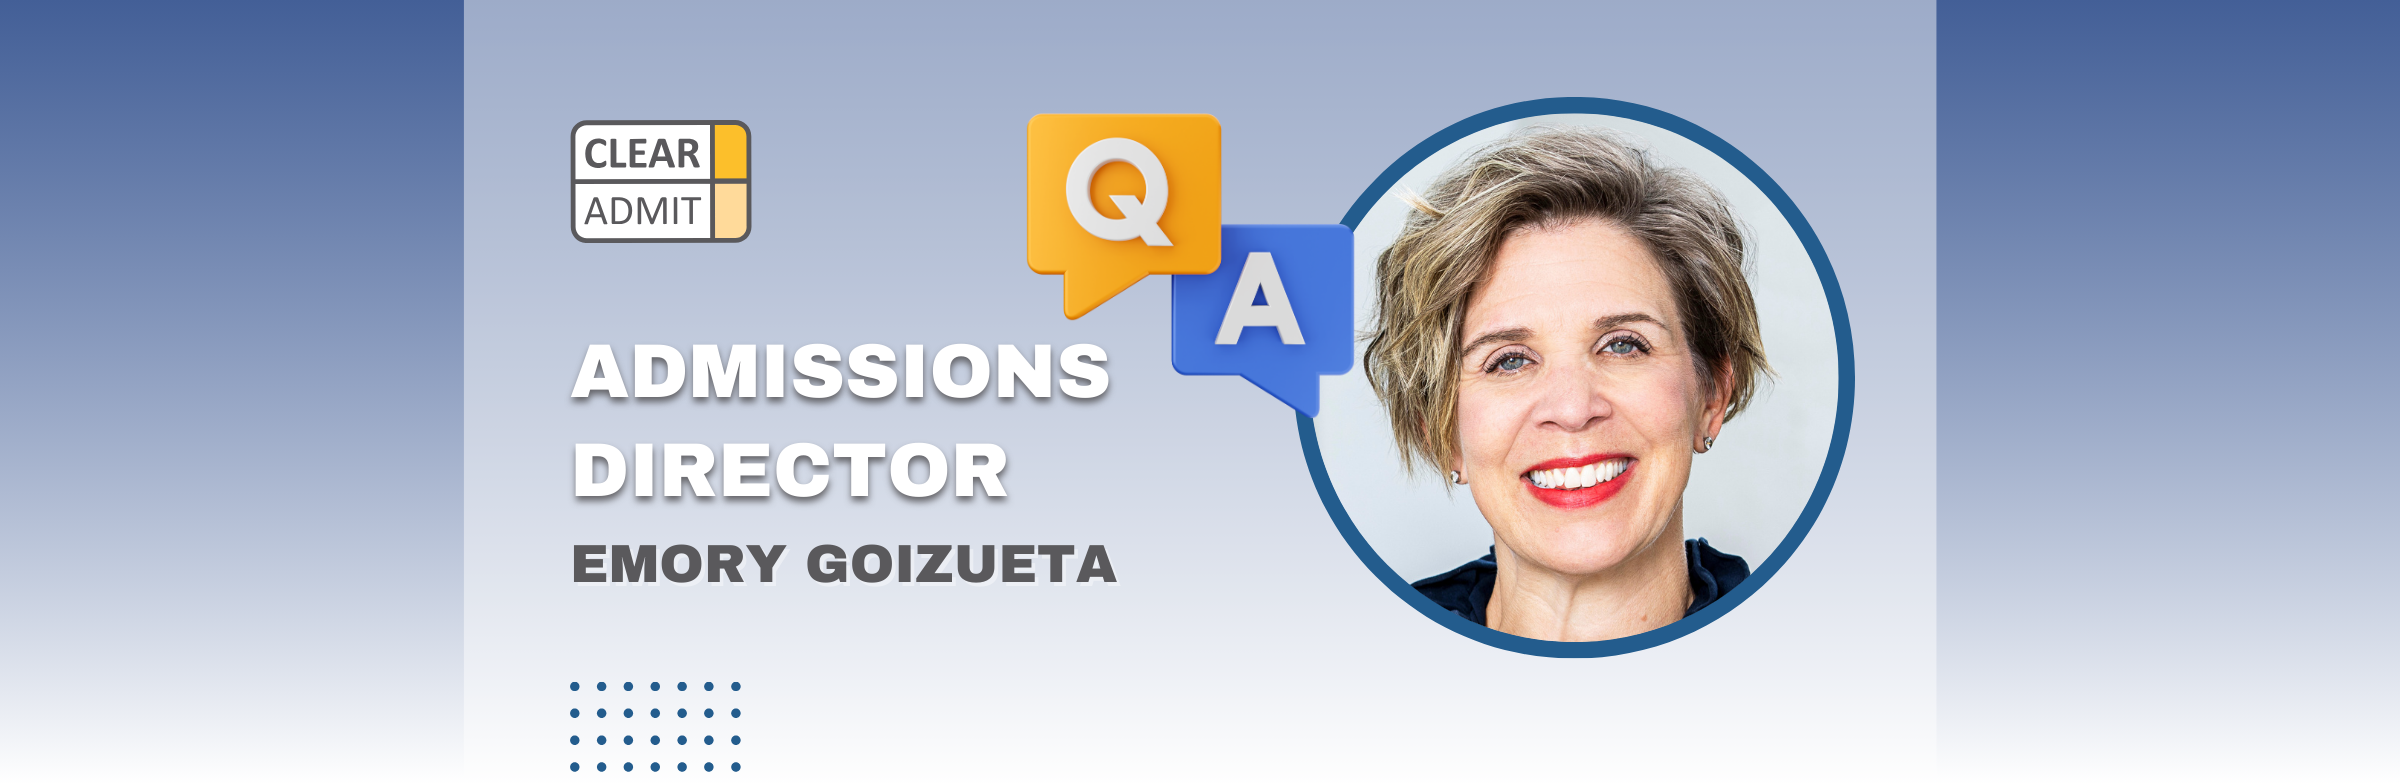 Image for Admissions Director Q&A: Melissa Rapp of Emory Goizueta